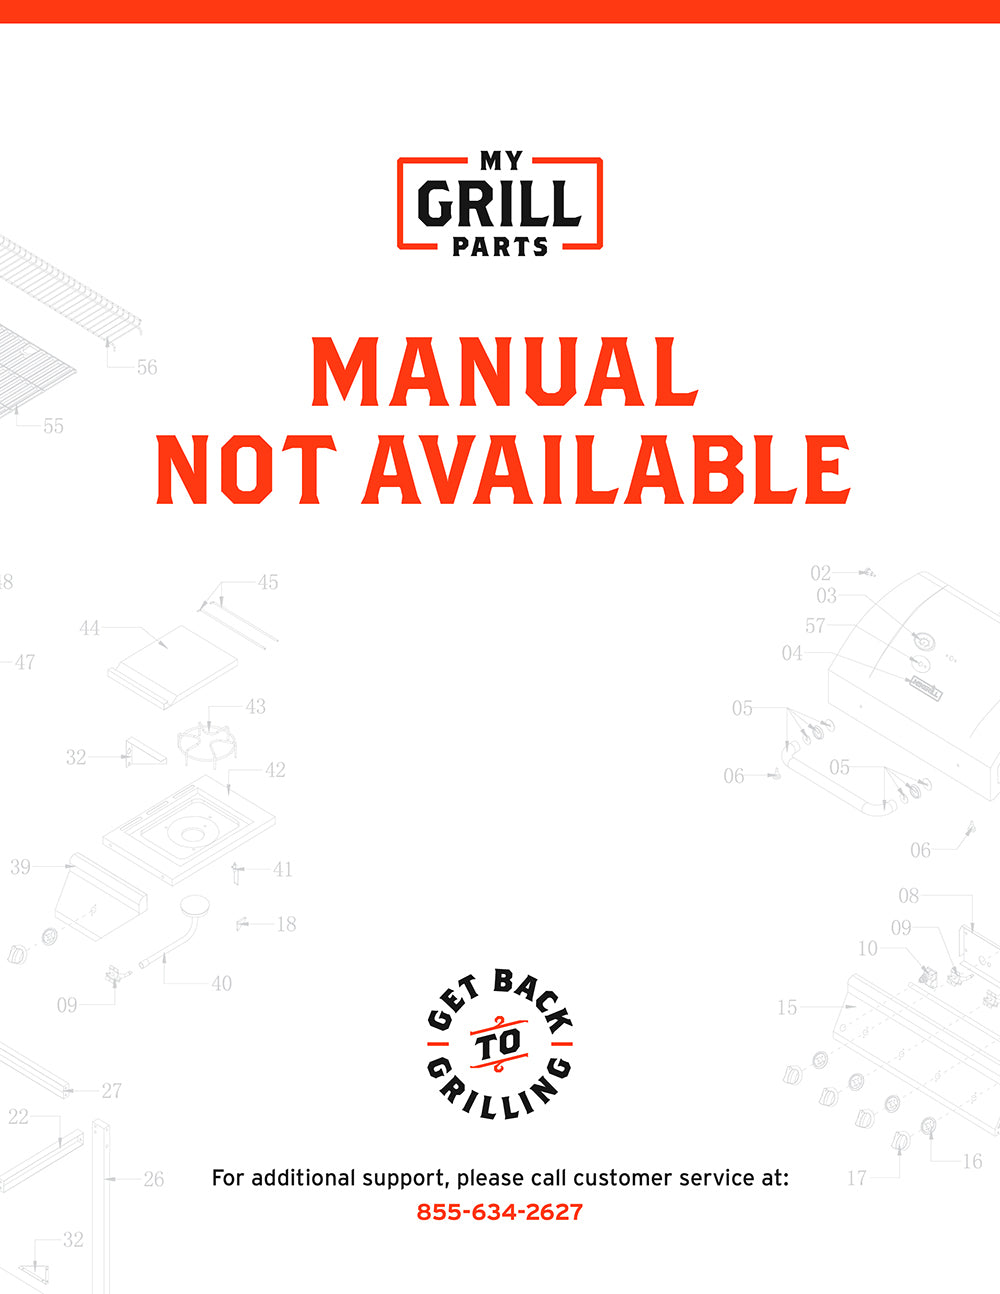 Replacement Grill Parts for KitchenAid 720-0819G